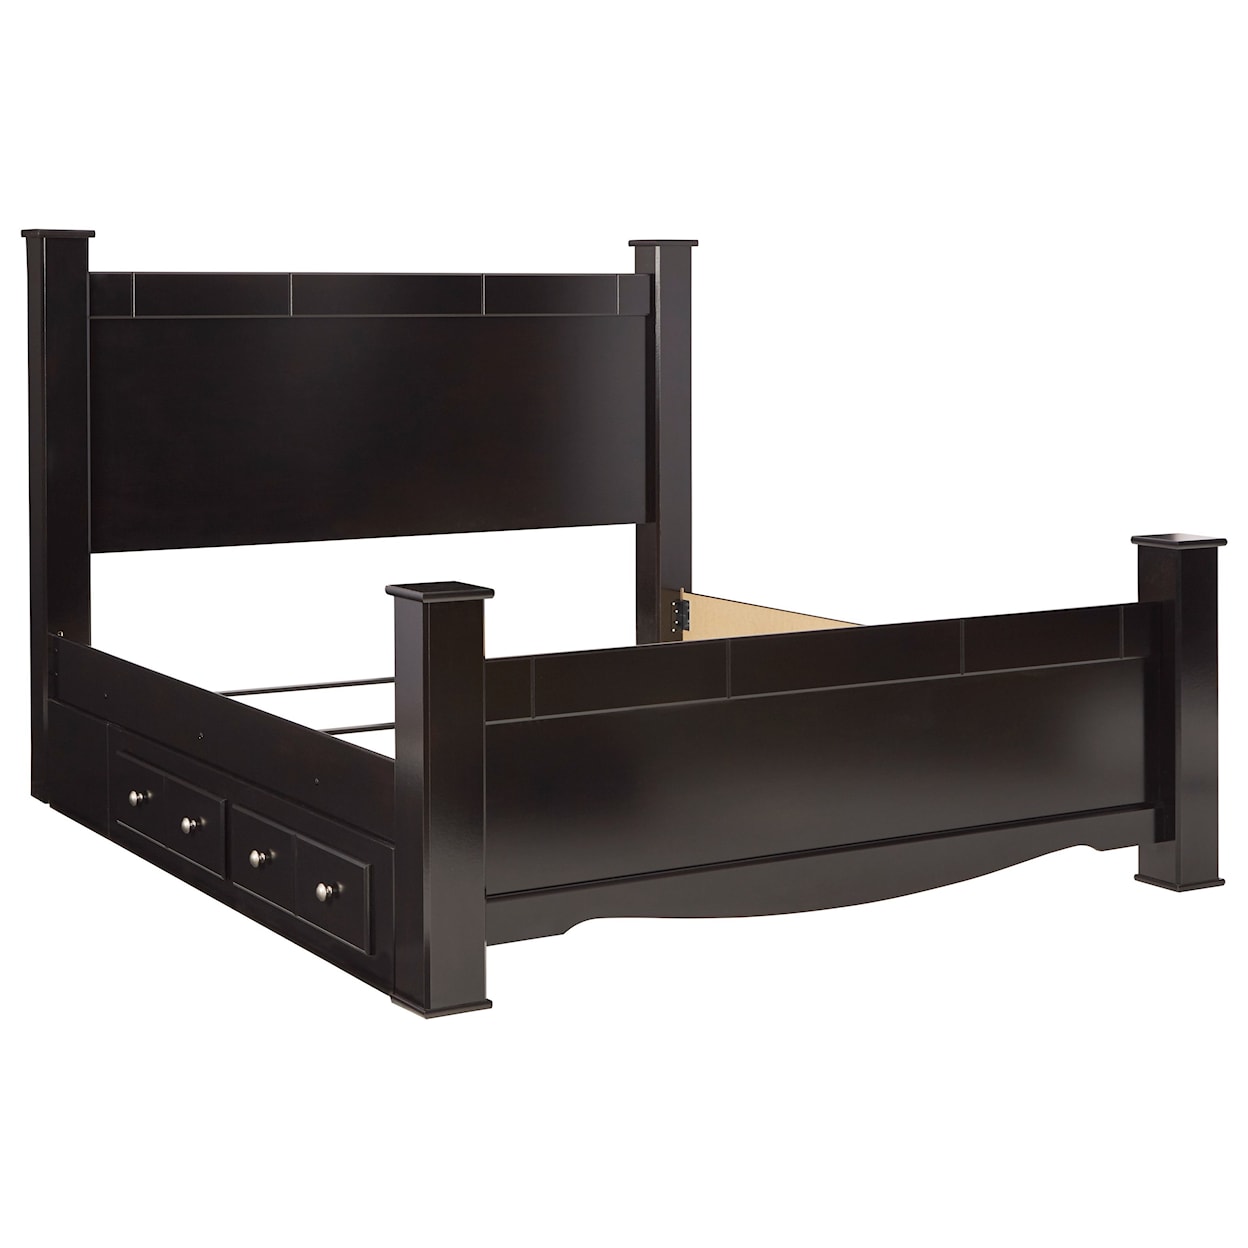 Ashley Furniture Signature Design Mirlotown King Poster Bed with Storage